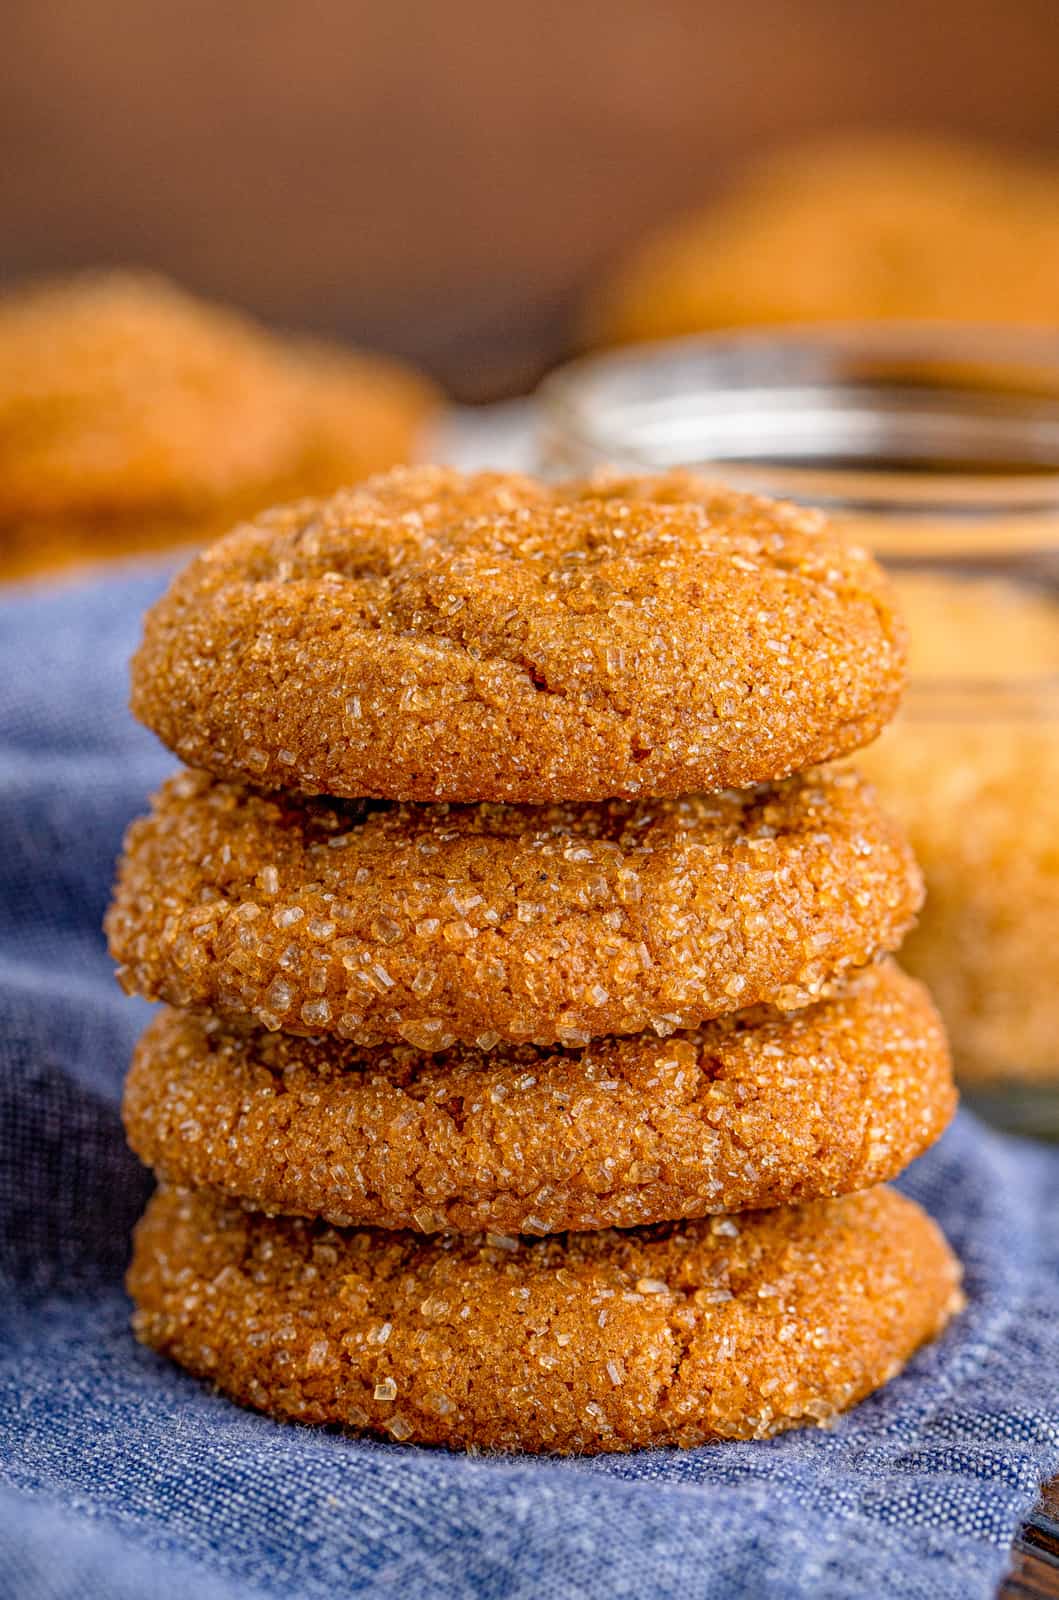 Four stacked Chewy Molasses Cookies on denim linen.